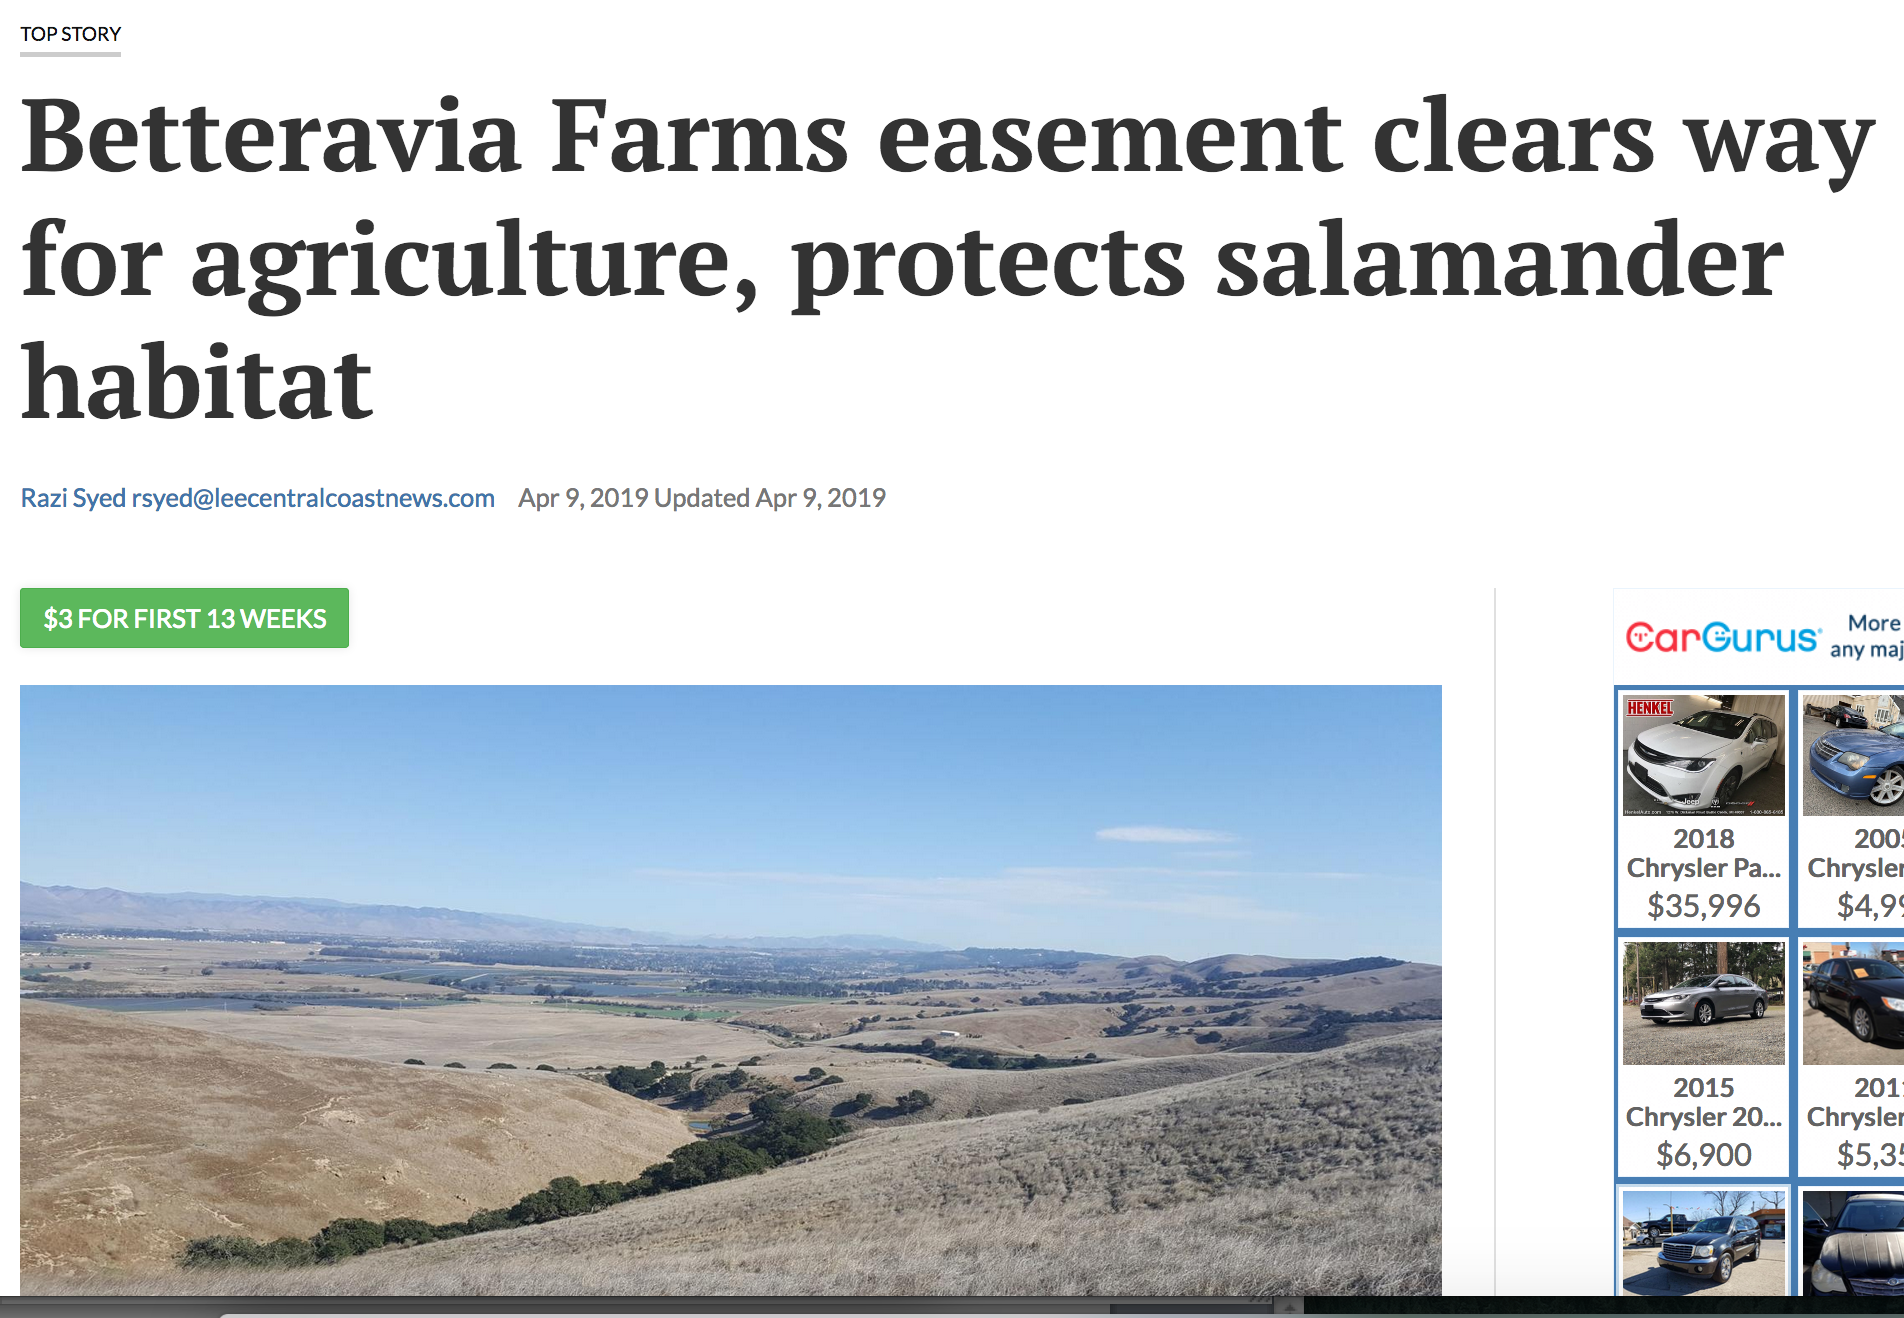 Betteravia Farms Easement Clears Way For Agriculture, Protects Salamander Habitat